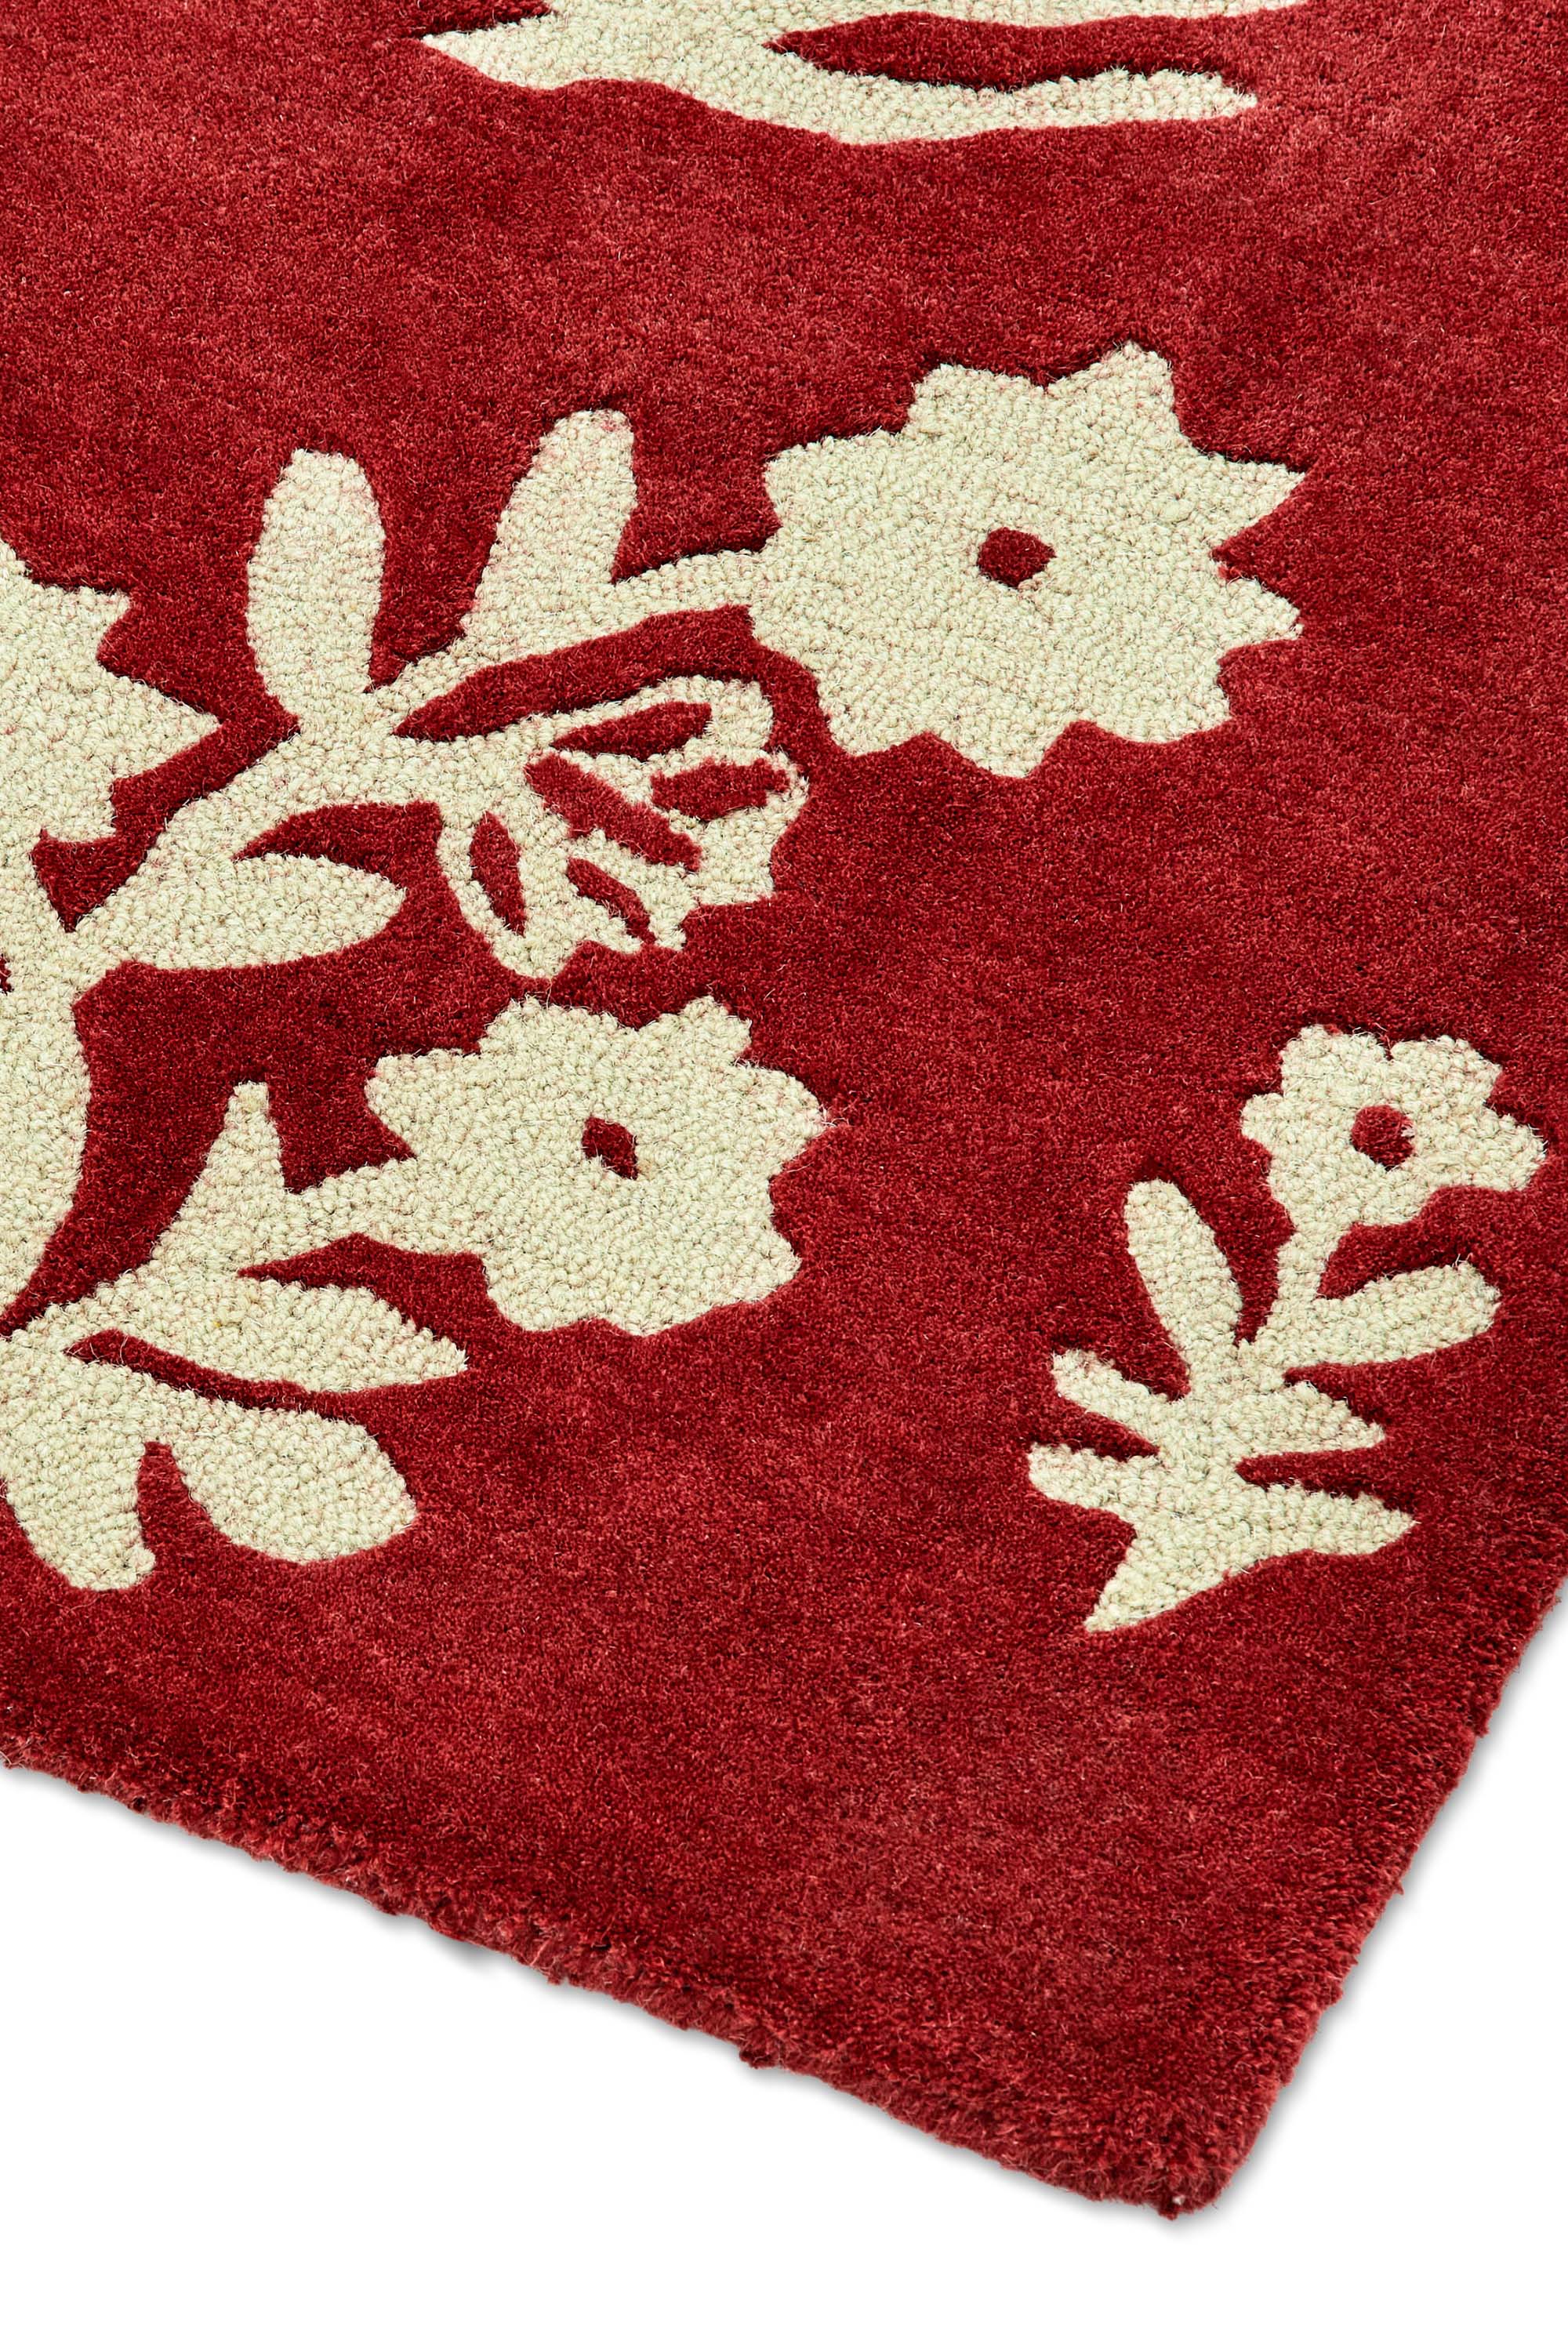 Red rug with cream floral motif